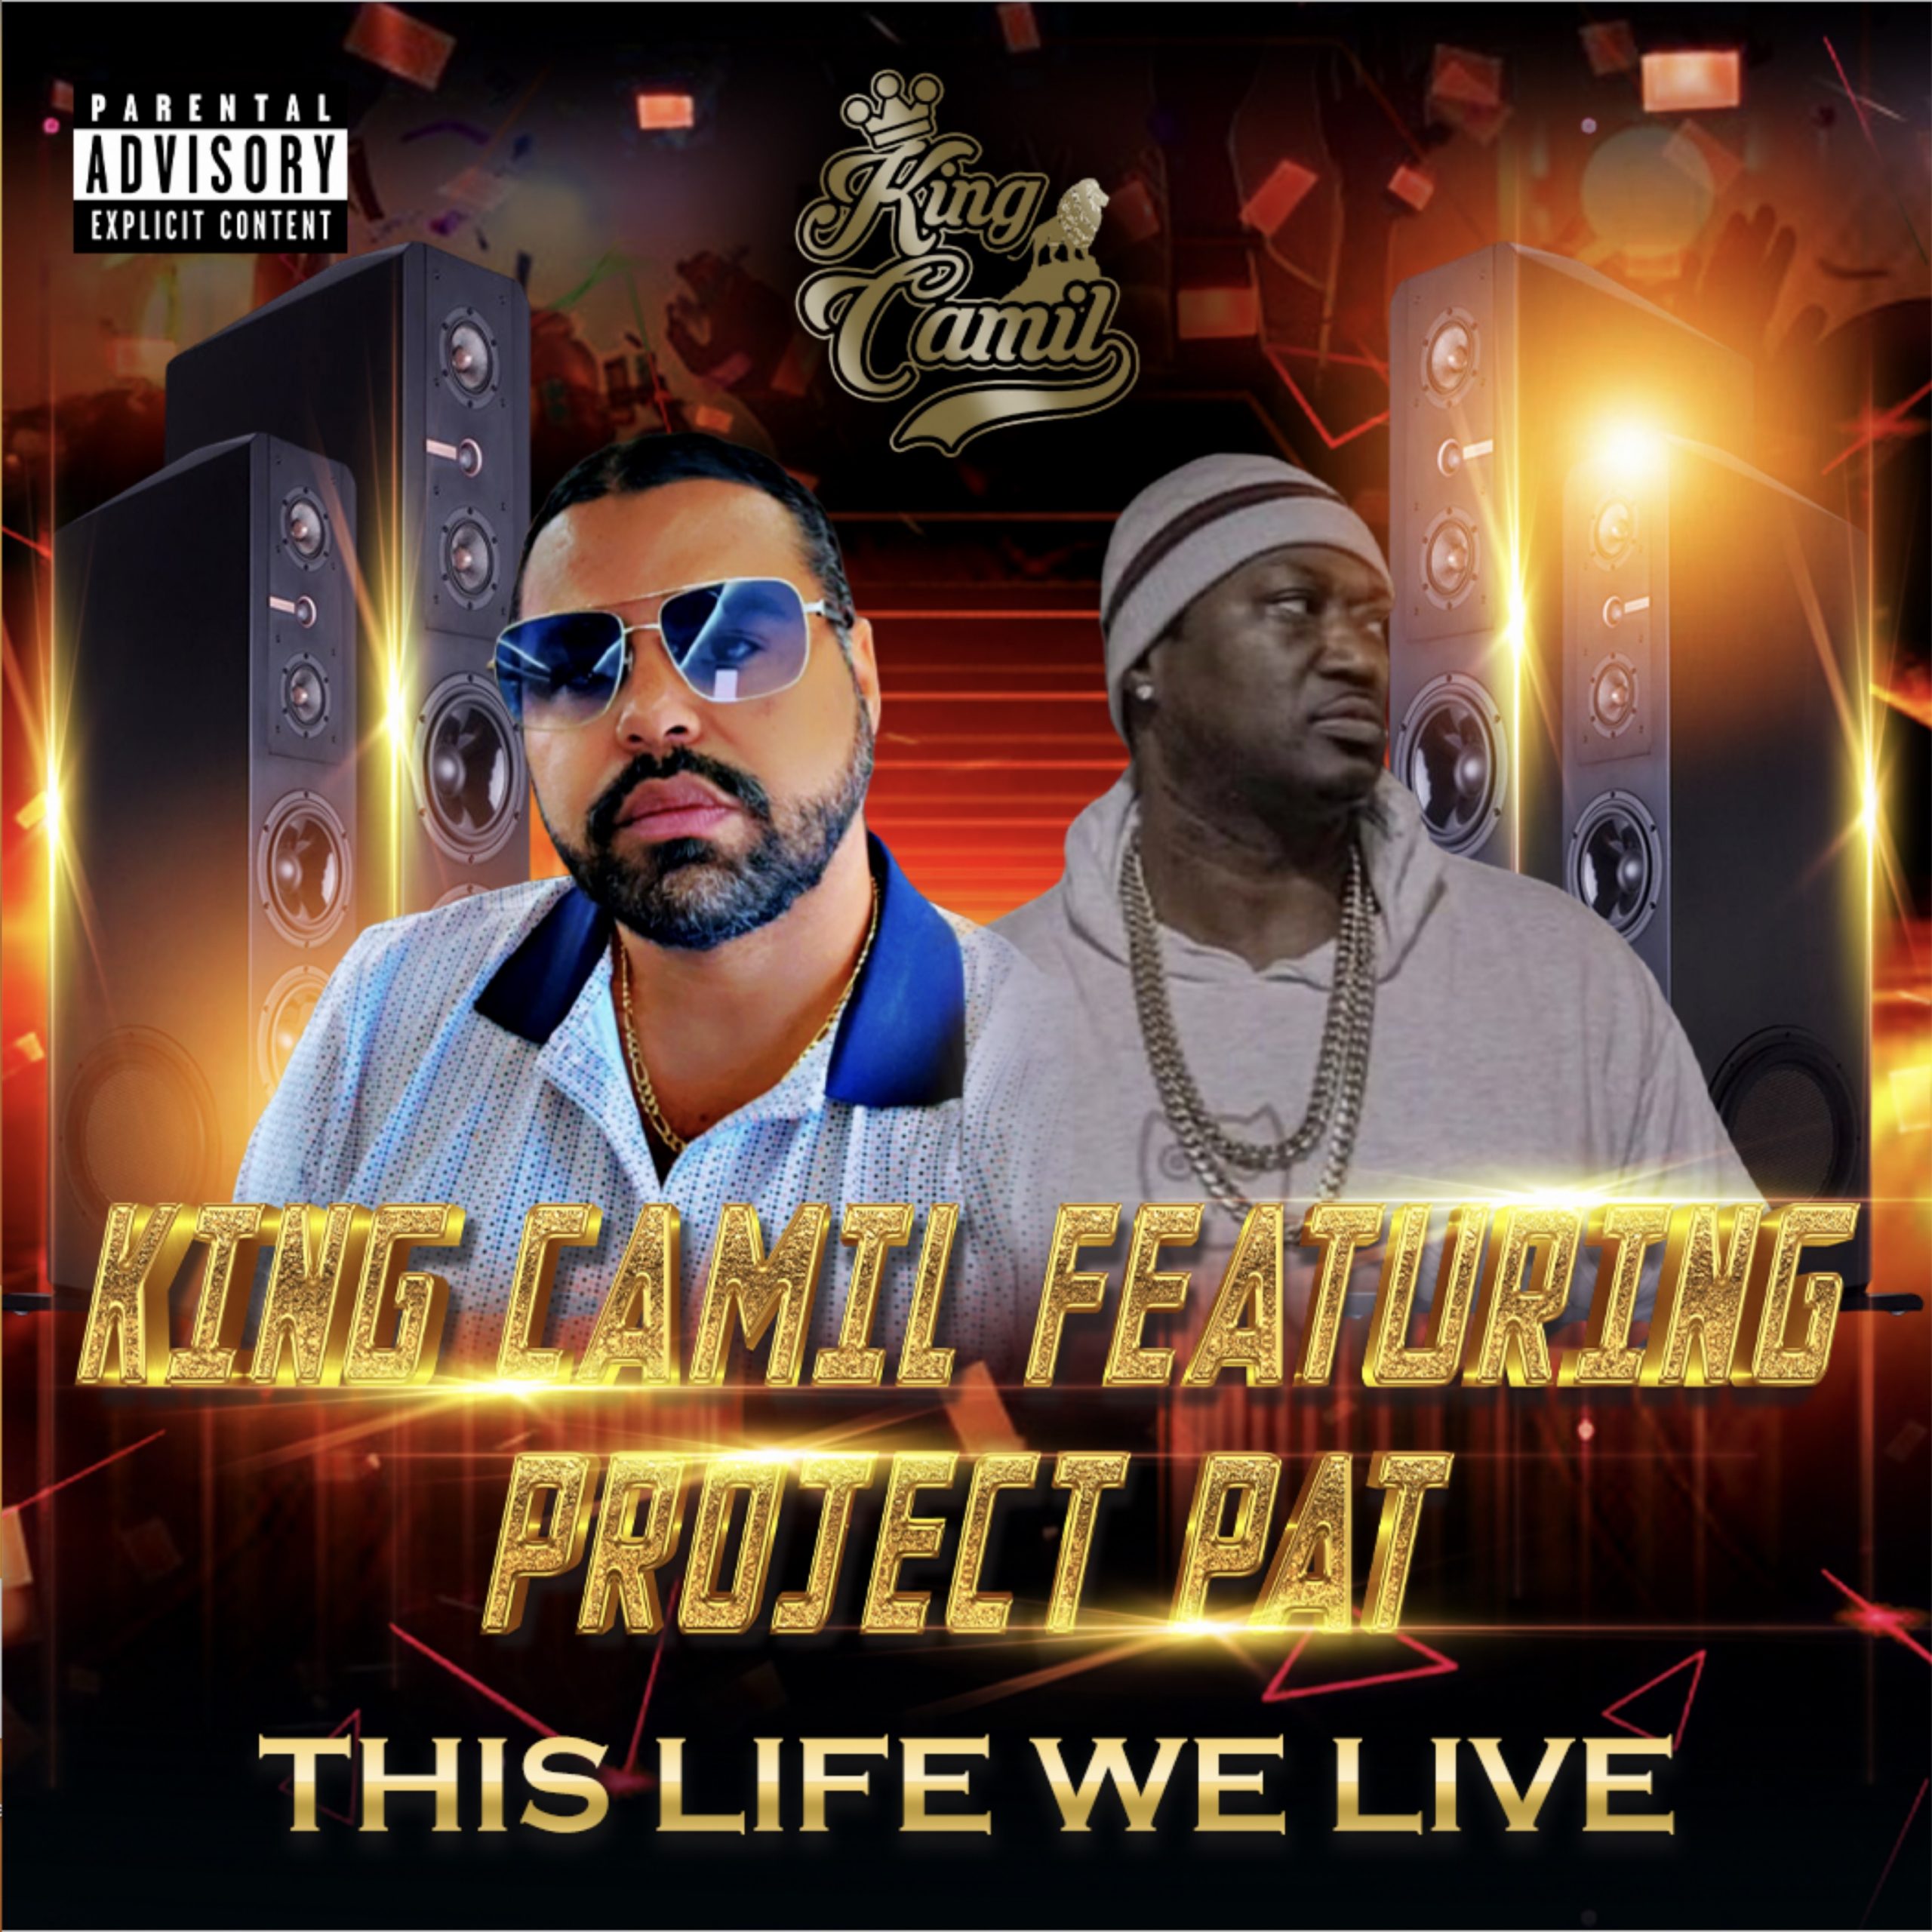 King Camil and Project Pat’s ‘Life We Live, Pt 2’ Hits Bafana FM Africa Daily A-List Playlist with Unmatched Rap Artistry